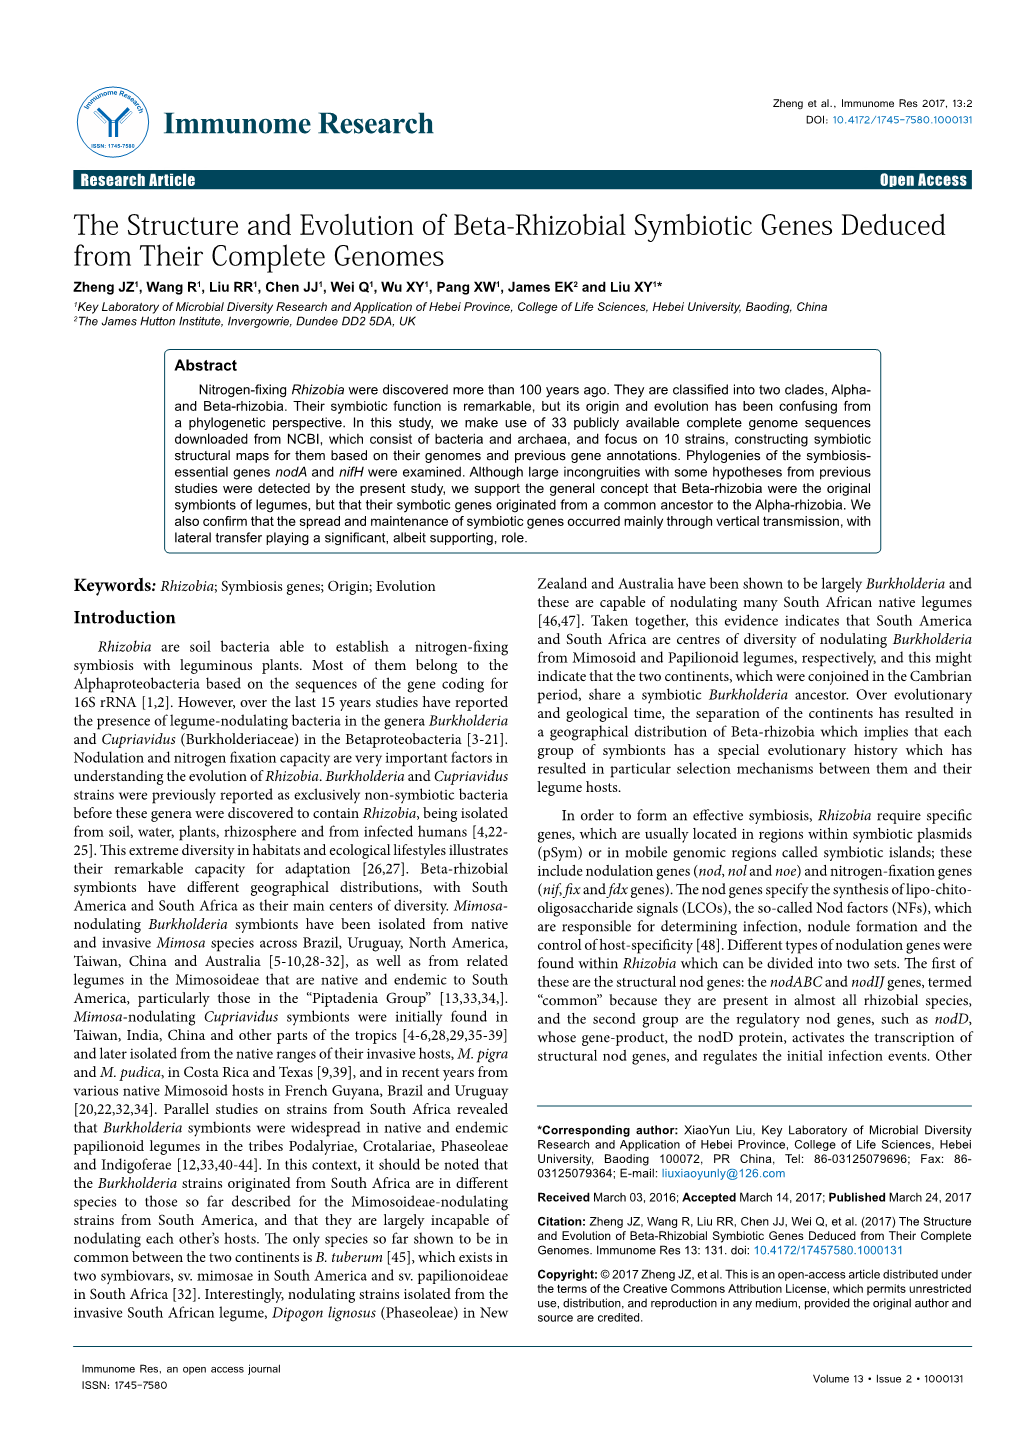 The Structure and Evolution of Beta-Rhizobial Symbiotic Genes